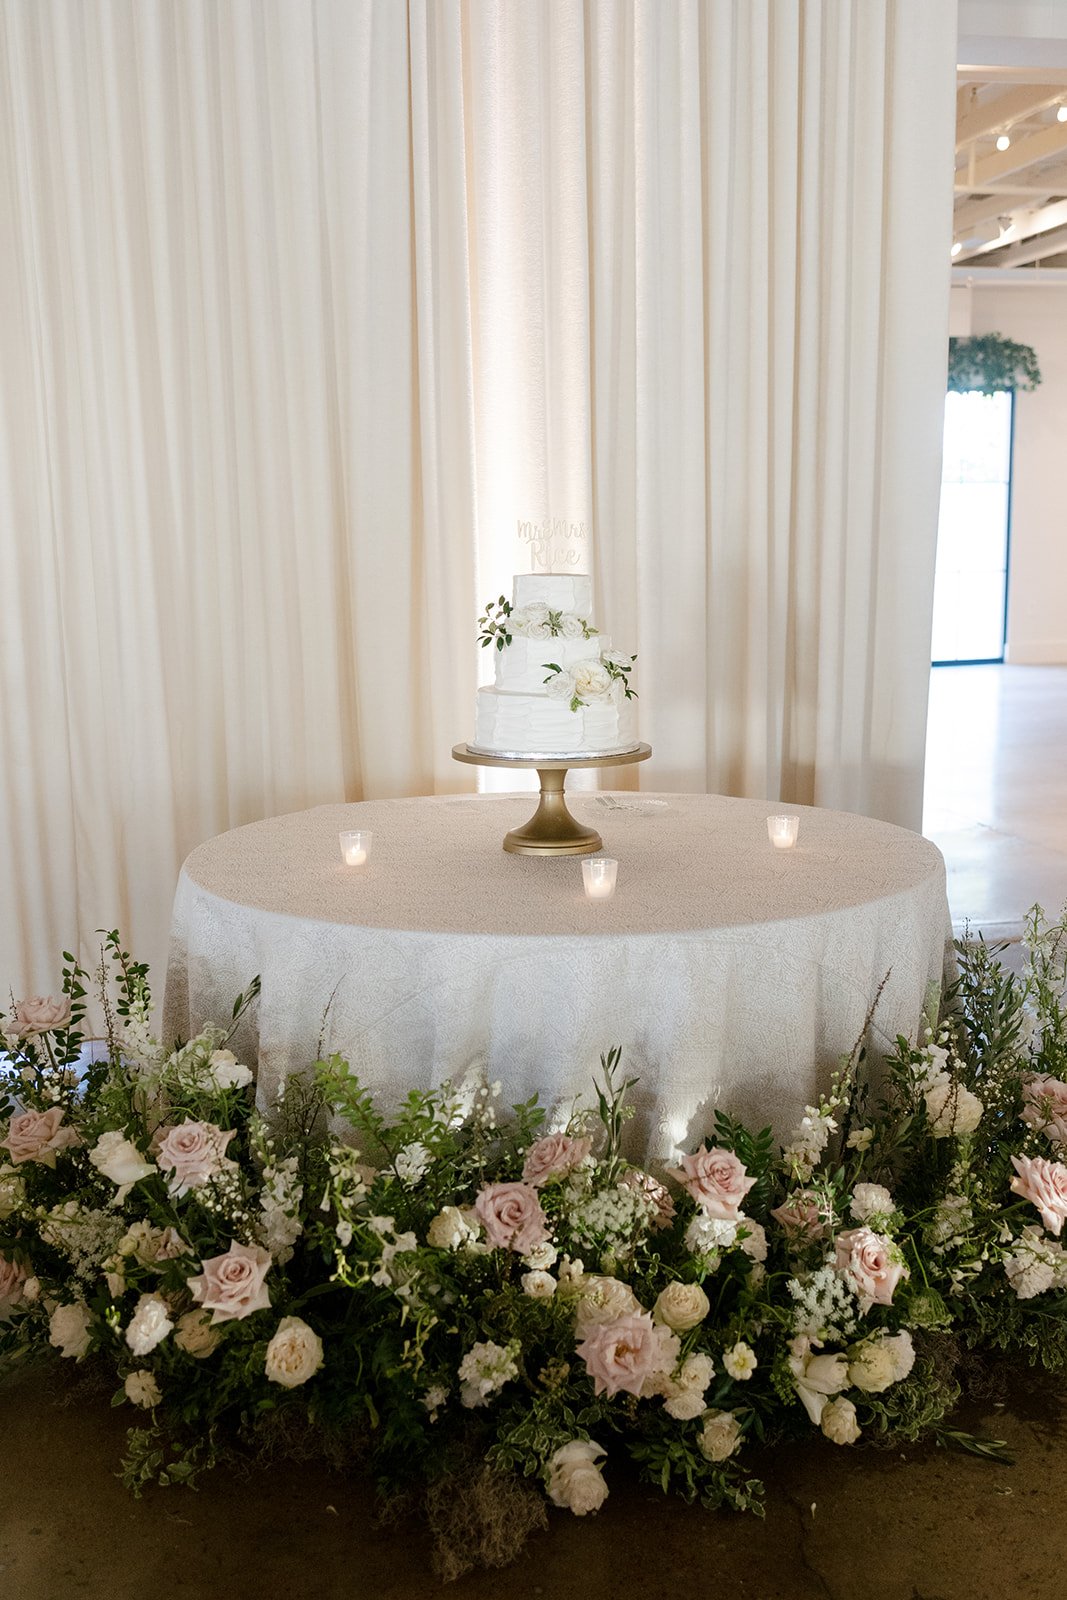 Classic white, cream, and blush wedding flowers. Florals composed of roses, ranunculus, Queen Anne’s lace, and greenery. Designed by Rosemary and Finch in Nashville, TN.